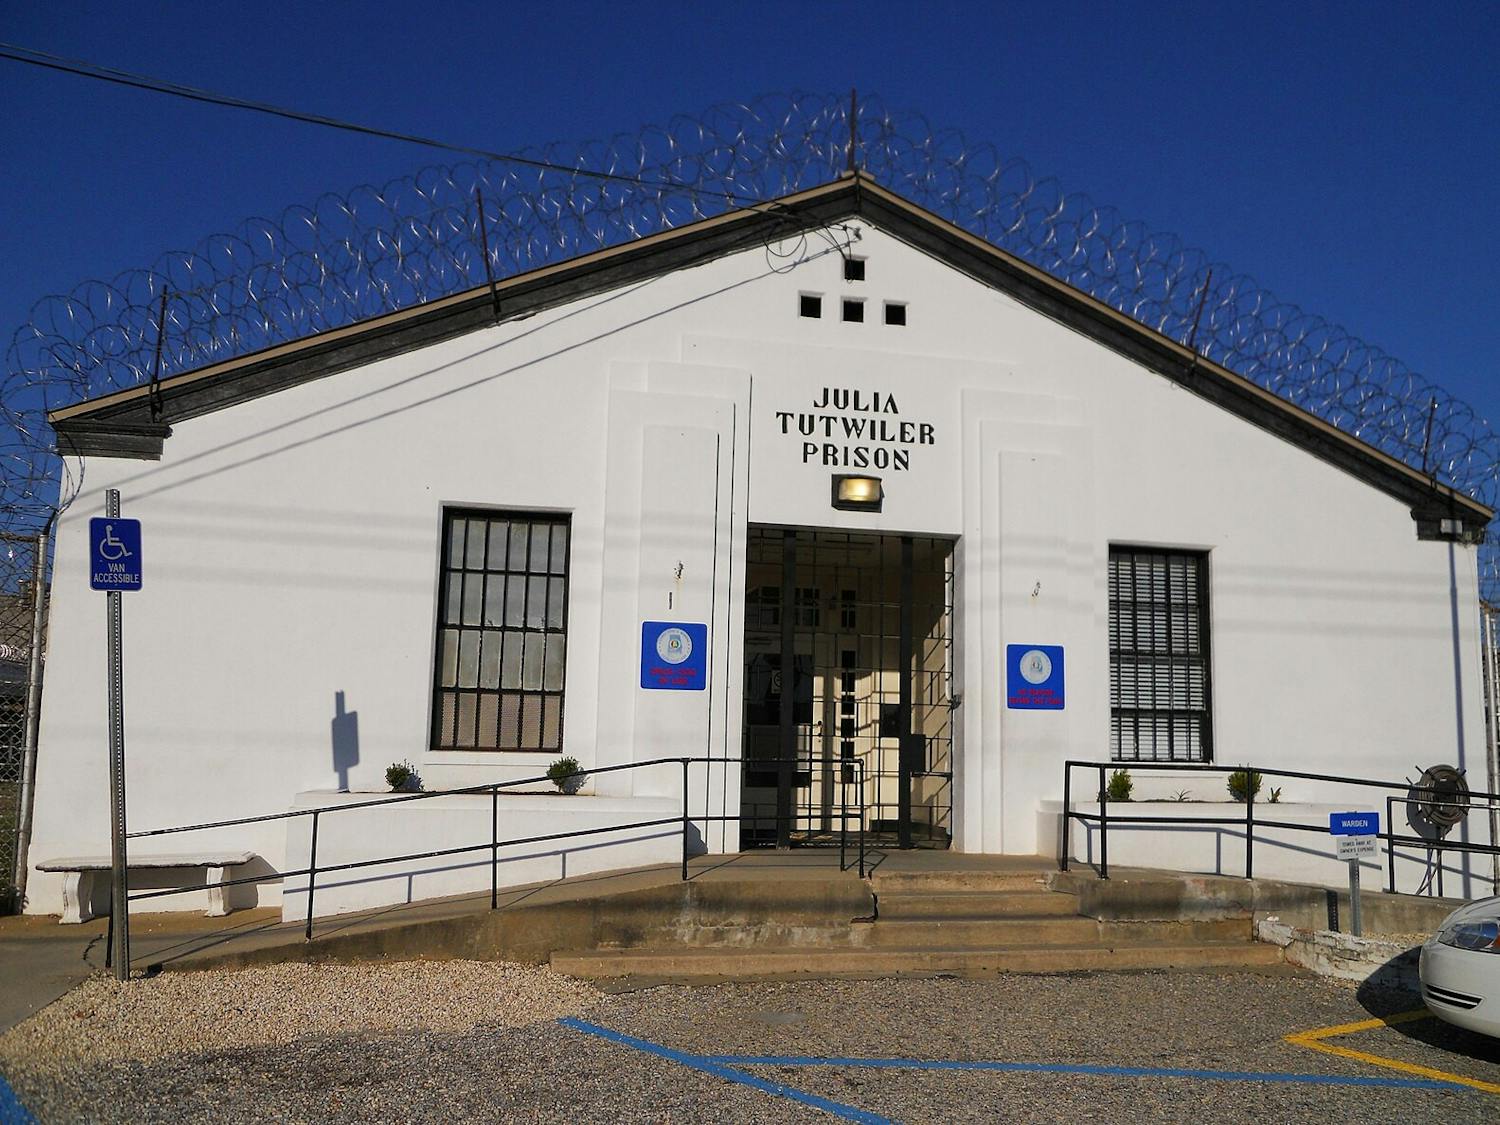 Alabama delivered the nation’s first nitrogen hypoxia execution (Photo courtesy of Wikimedia Commons / “Julia Tutwiler Prison Wetumpka Alabama” by Rivers A. Langley. CC-BY-SA-3.0. March 16, 2011).